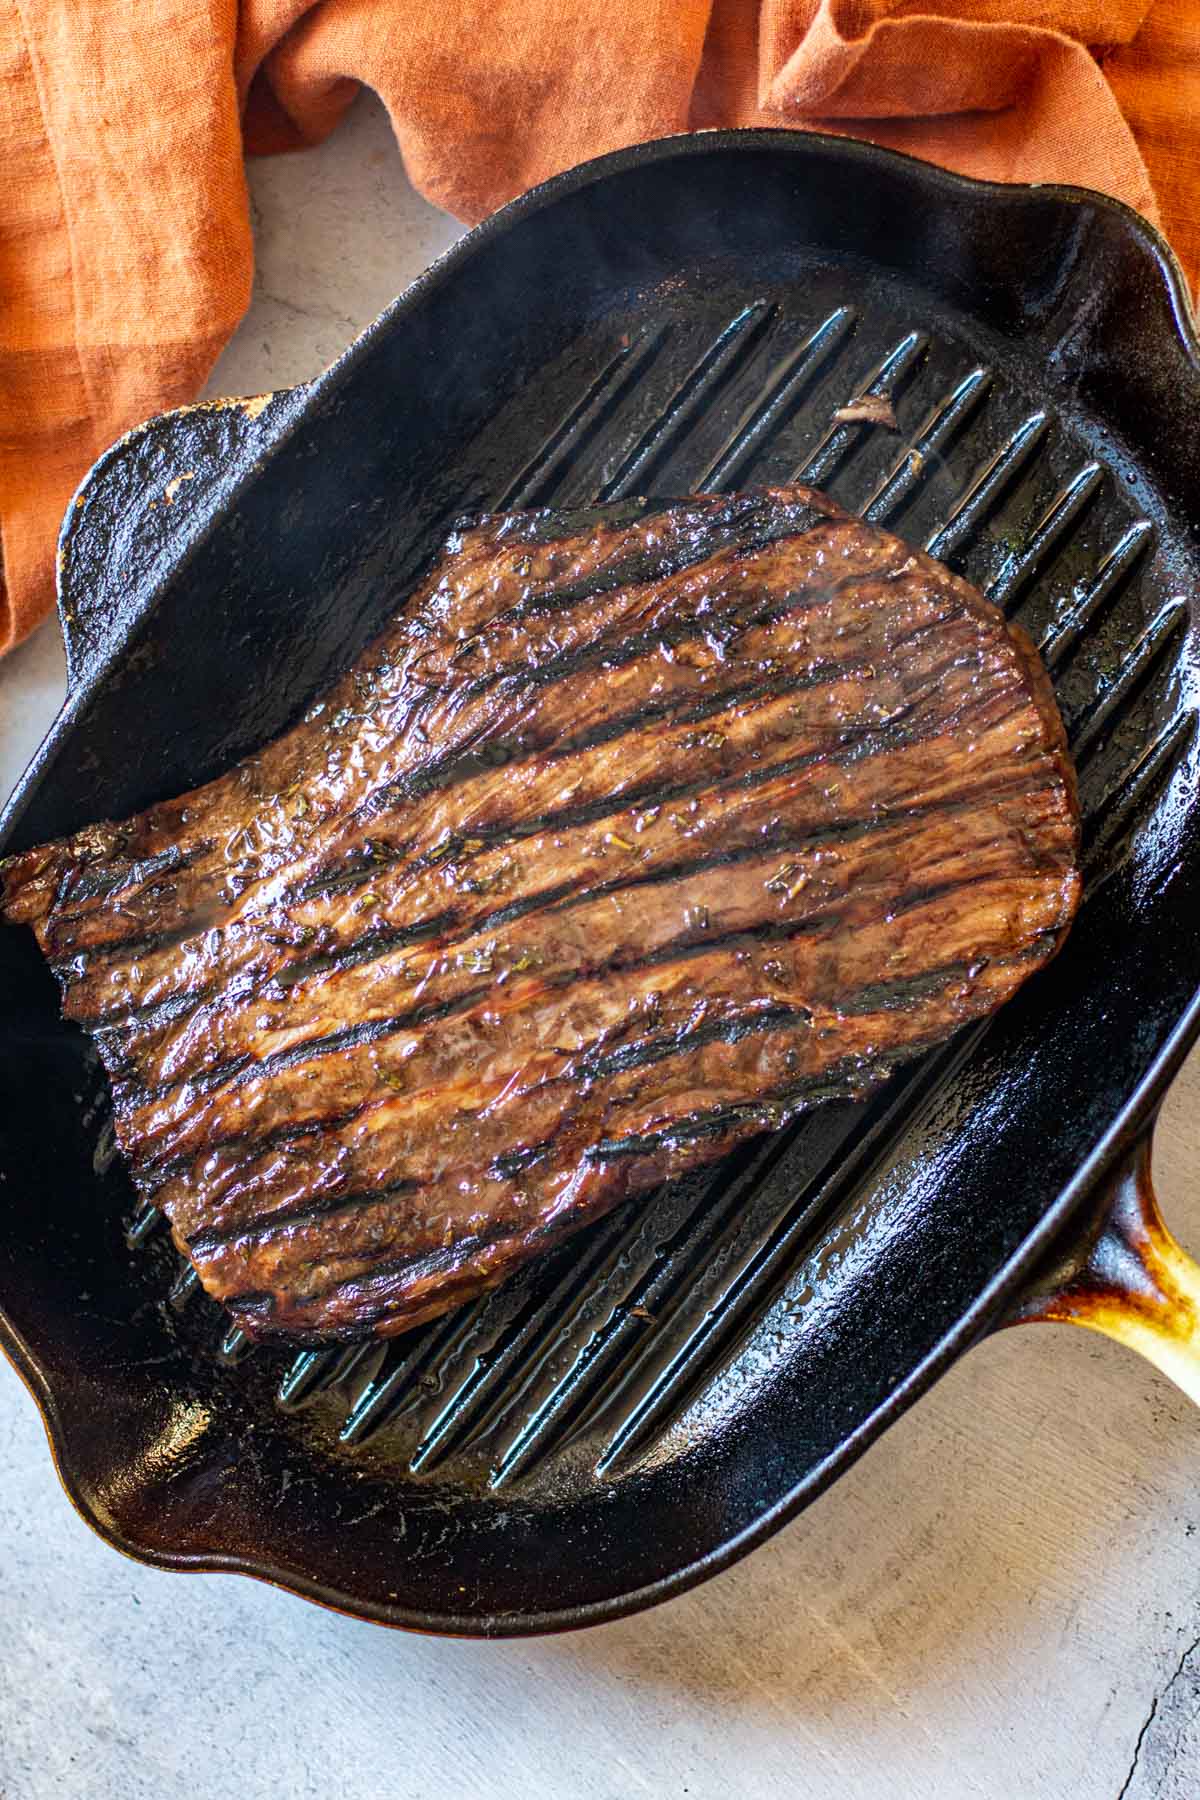 Cooked flank steak in a grill pan stove top.